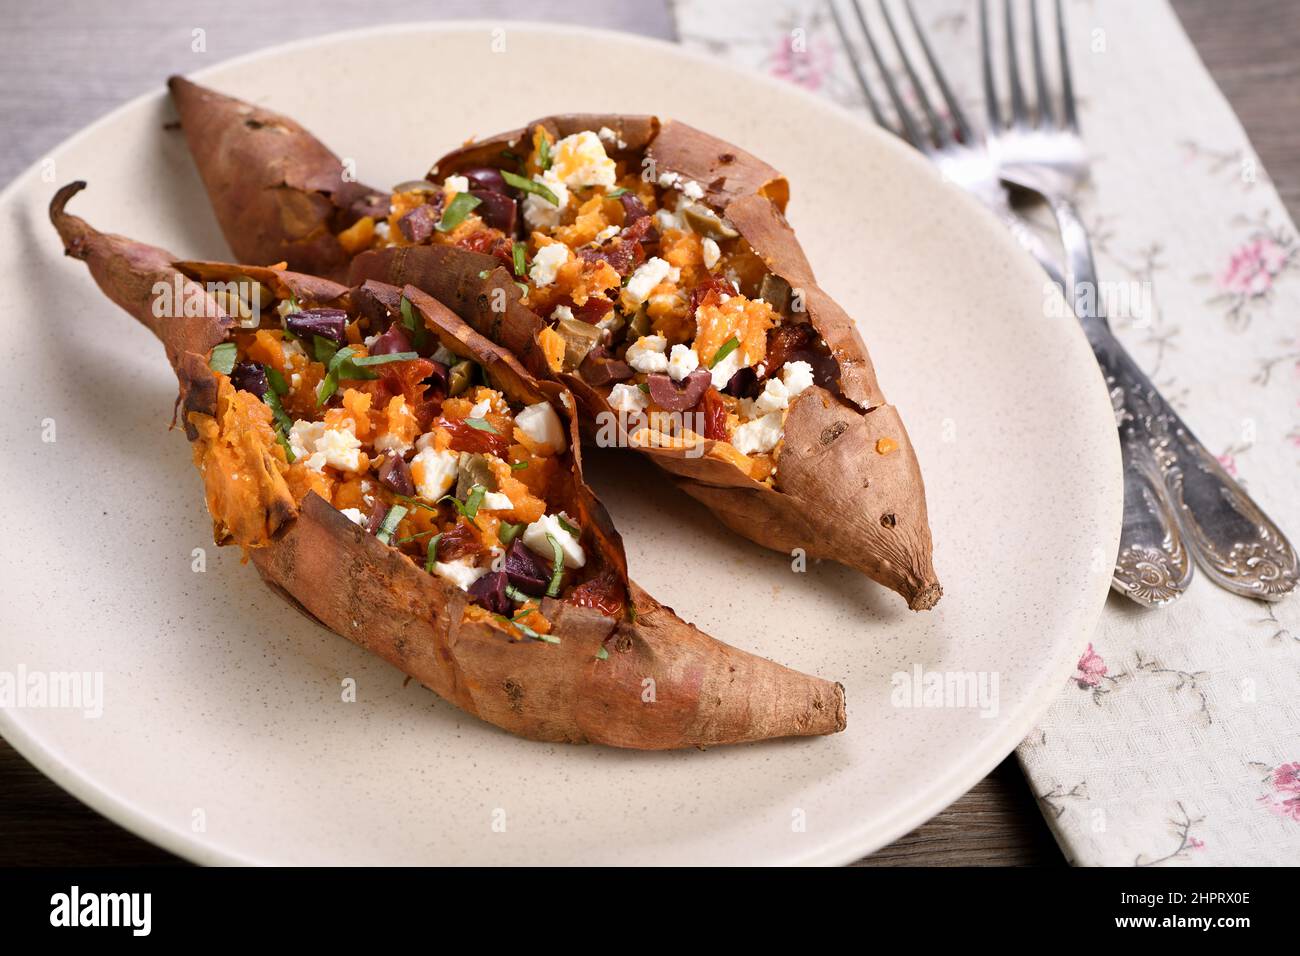 Baked sweet potato stuffed with chopped sun-dried tomatoes, olives, feta cheese and basil with aromatic dressing Stock Photo